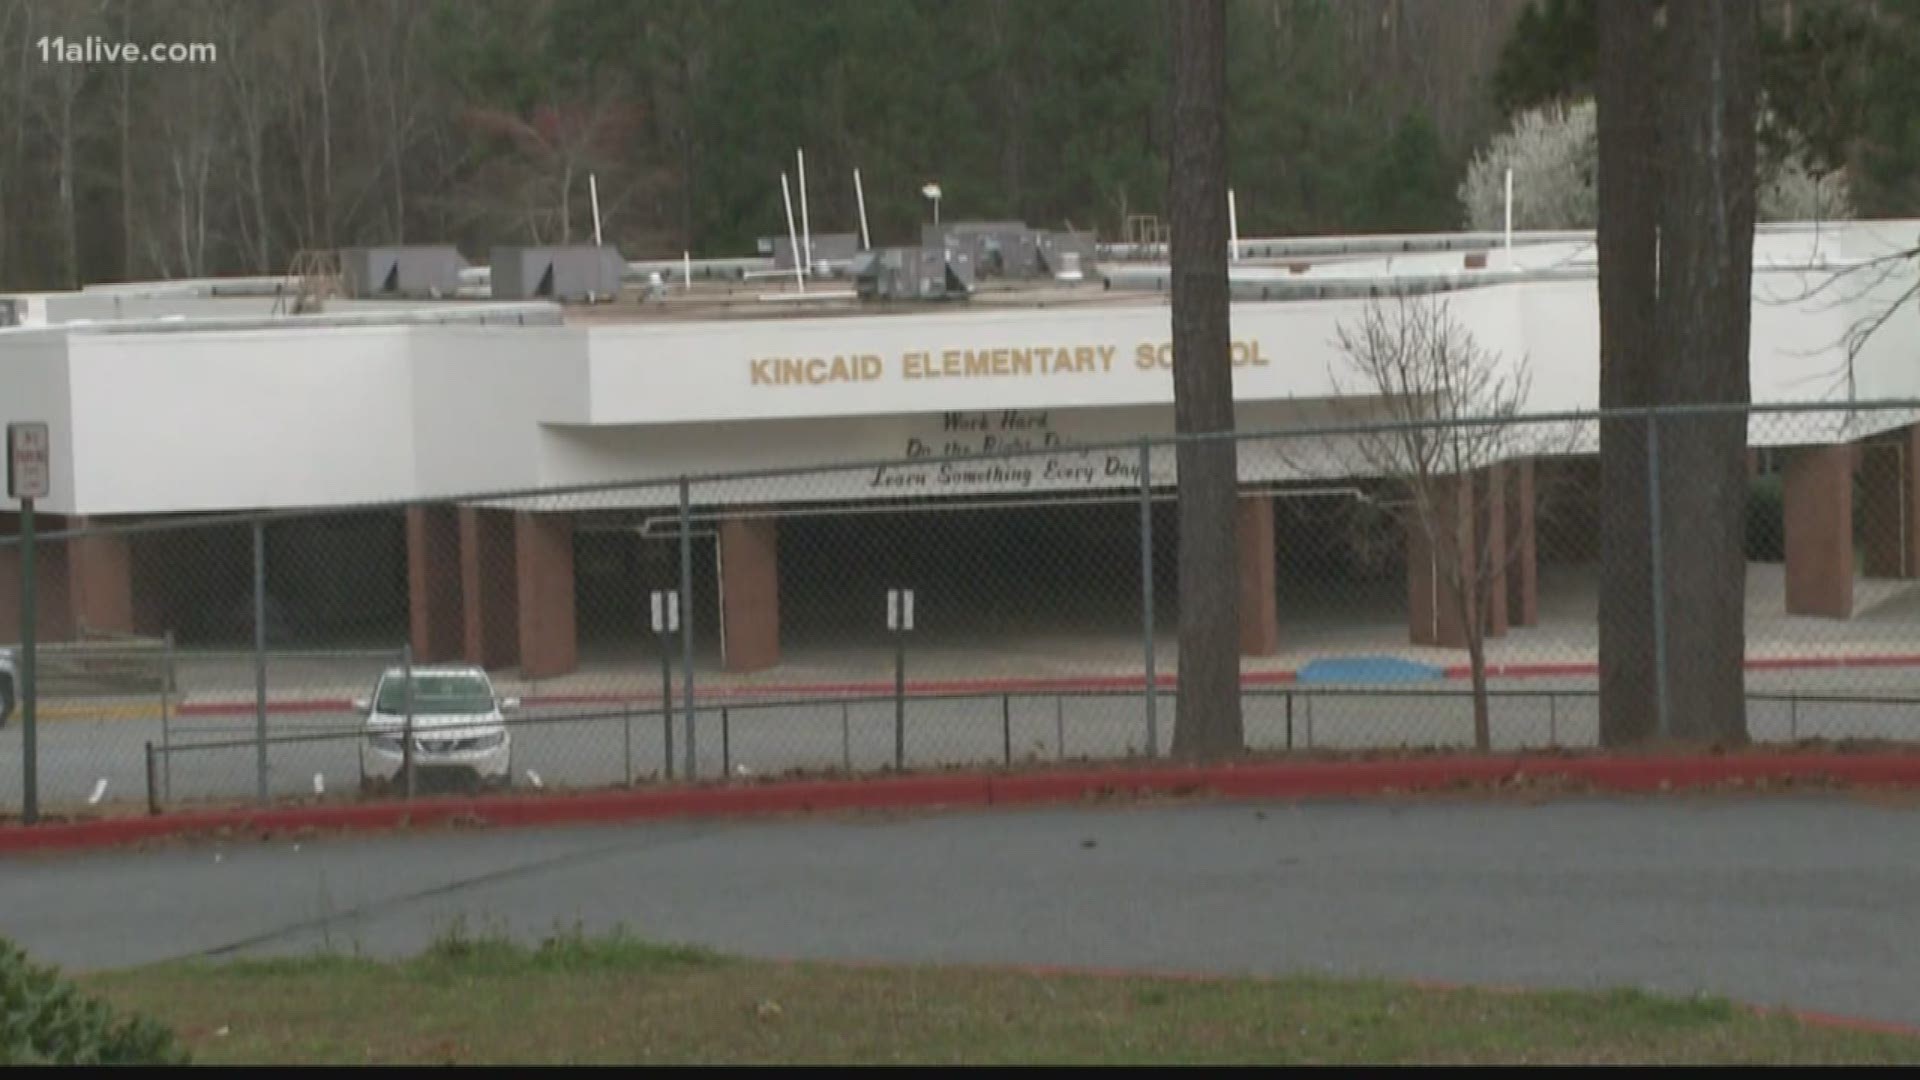 The district said the Department of Public Health informed them of a positive case of the virus at Kincaid Elementary School.